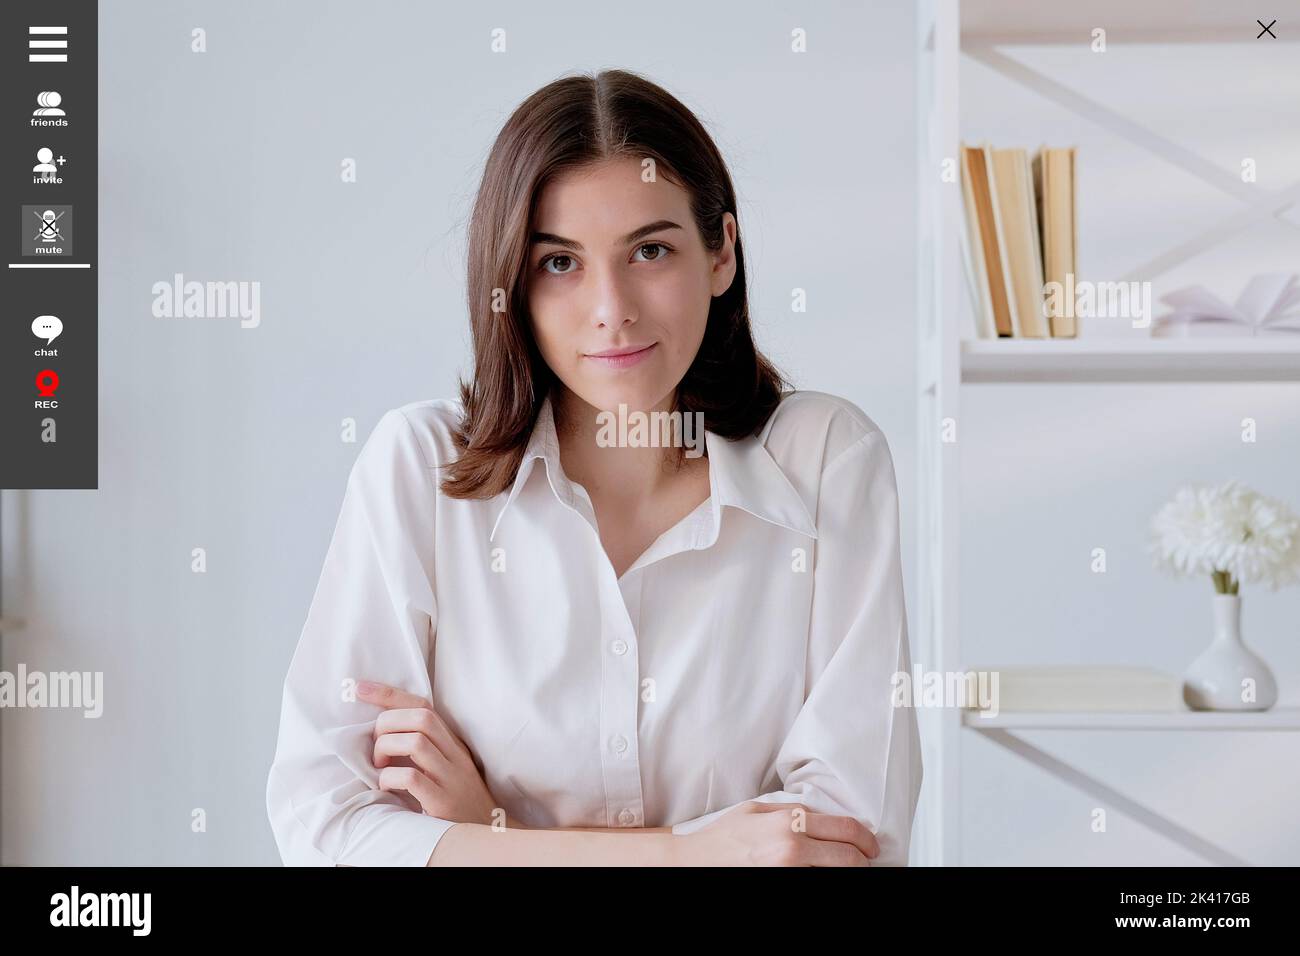 Online education. Elegant woman. Screen mockup. Pretty smiling lady sitting desk having online conference in light room interior. Stock Photo